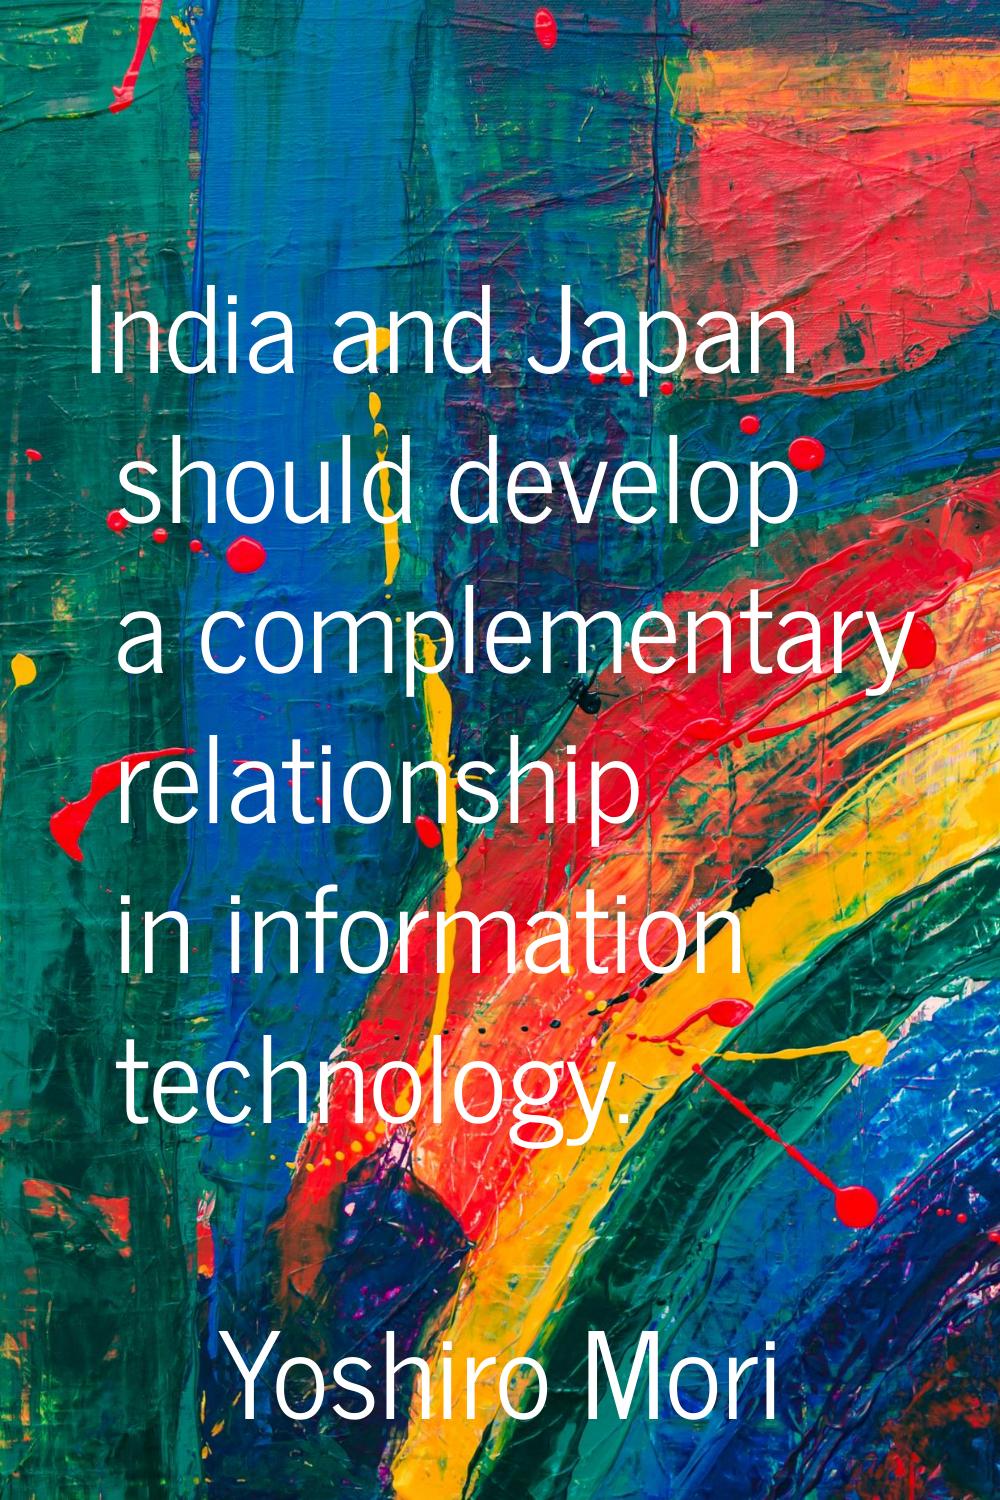 India and Japan should develop a complementary relationship in information technology.